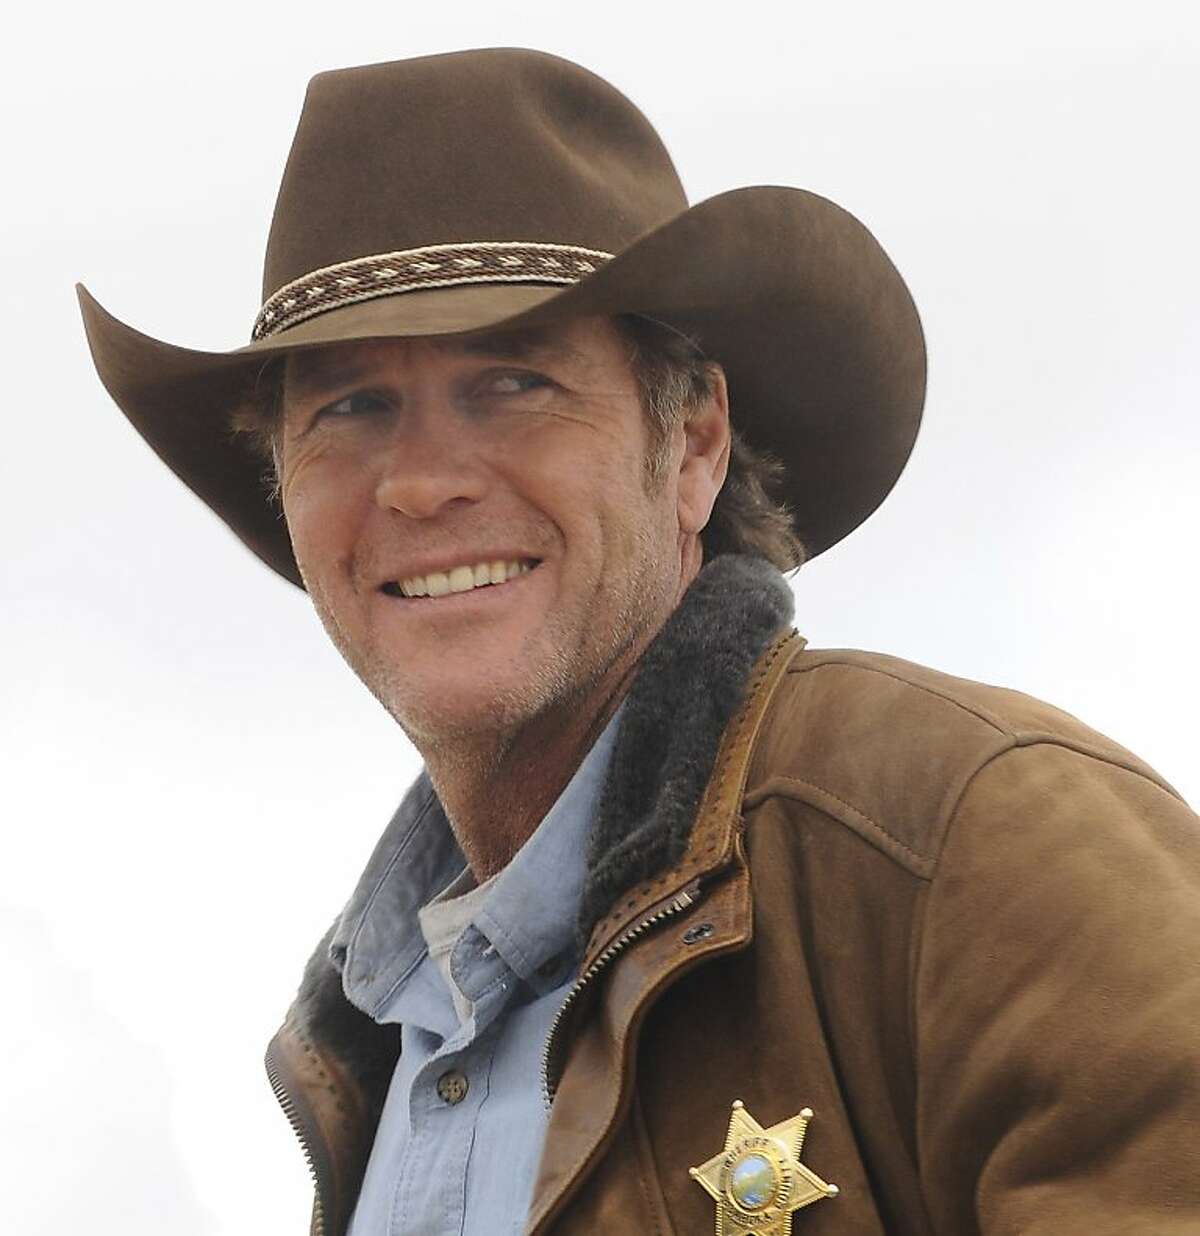 Australian Robert Taylor plays the troubled sheriff in A&E's new series, "Longmire," premiering June 3. (MCT)